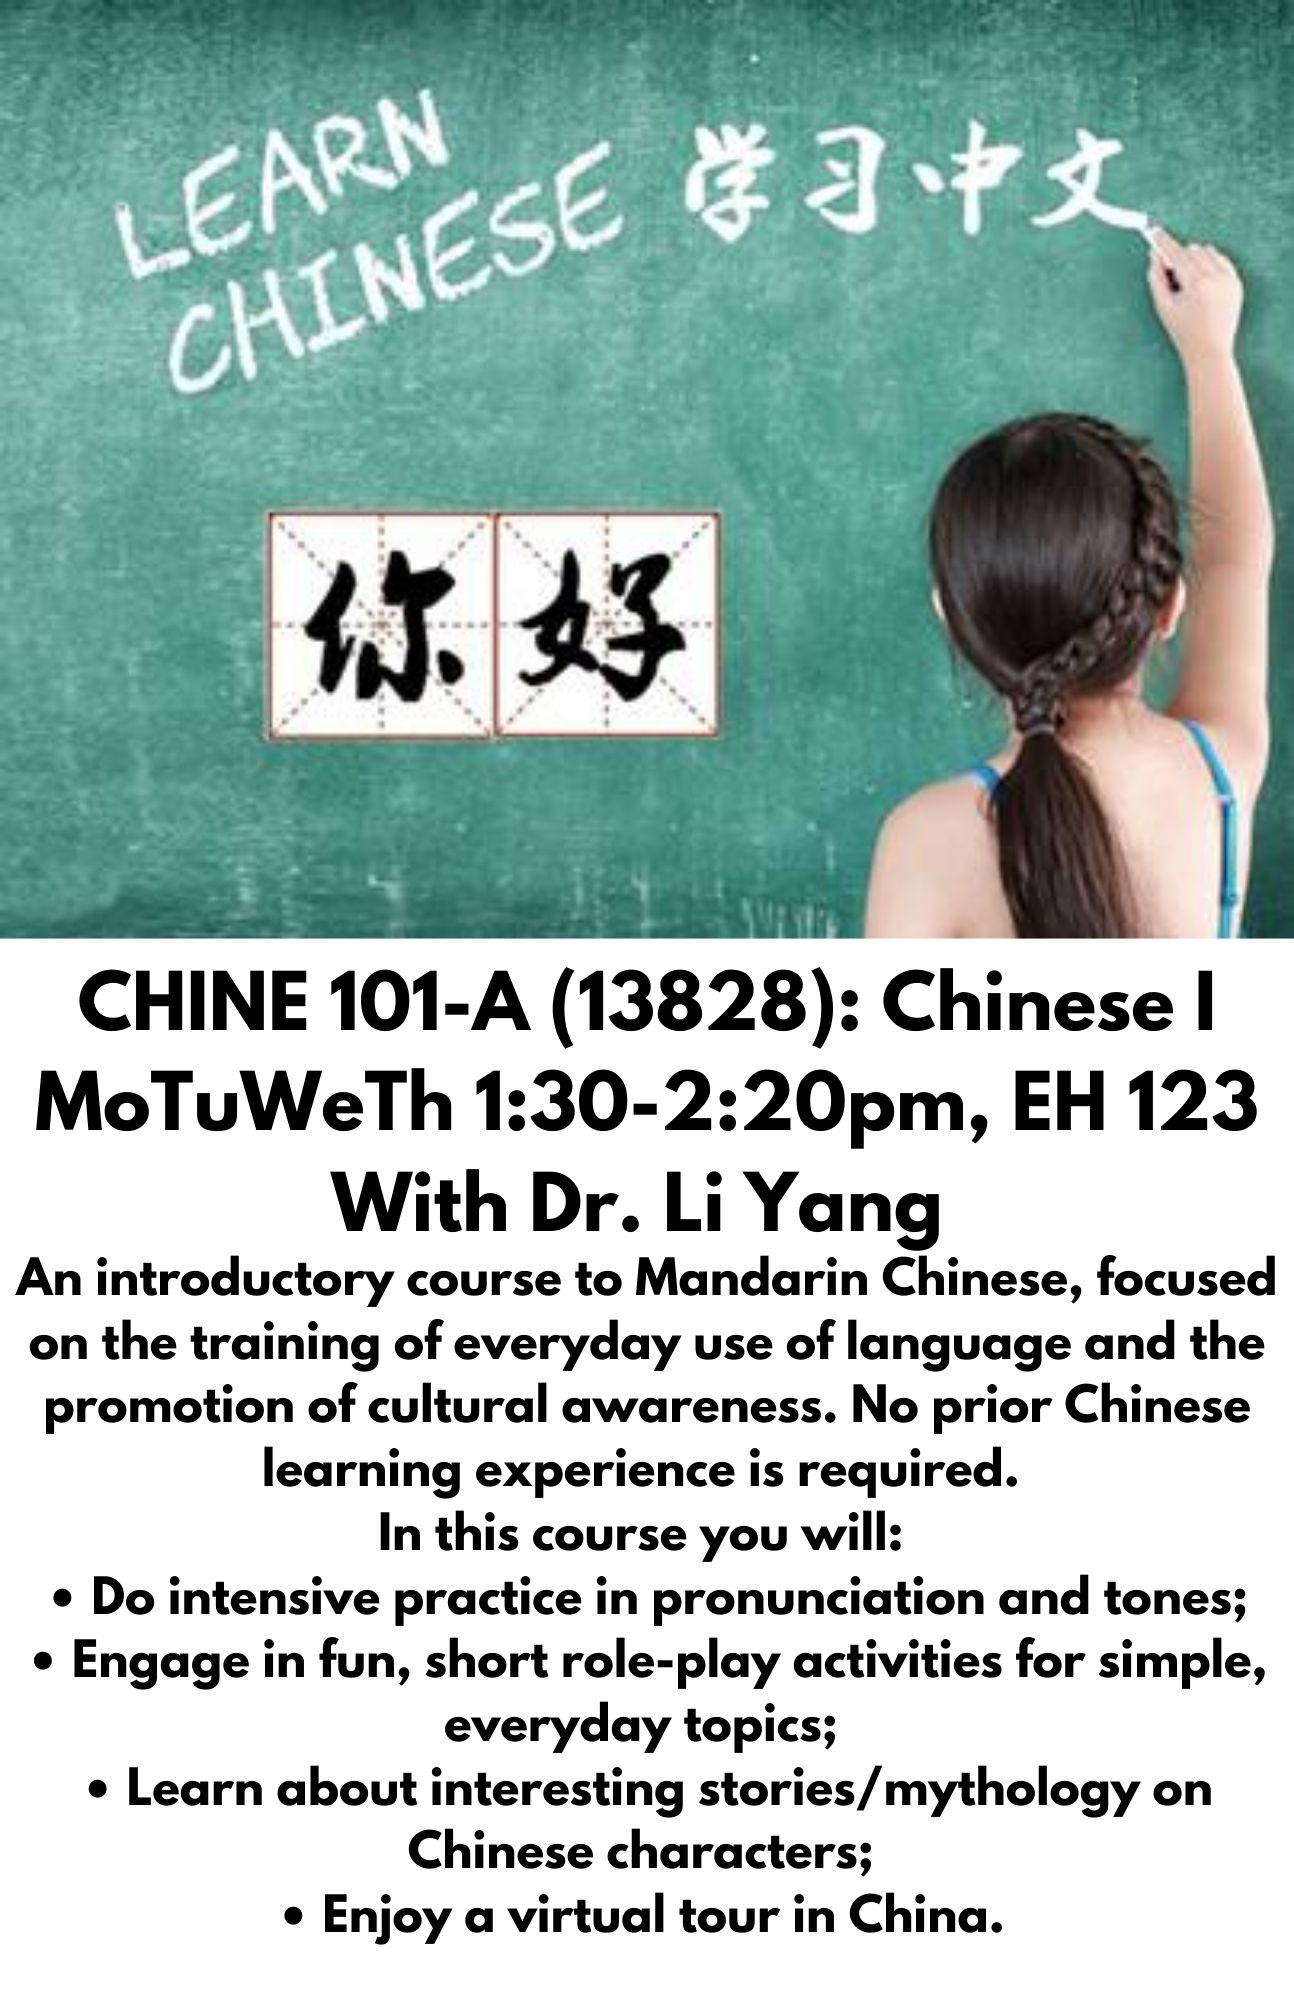 CHINE 101-A (13828): Chinese I MoTuWeTh 1:30-2:20pm, EH 123 With Dr. Li Yang. 